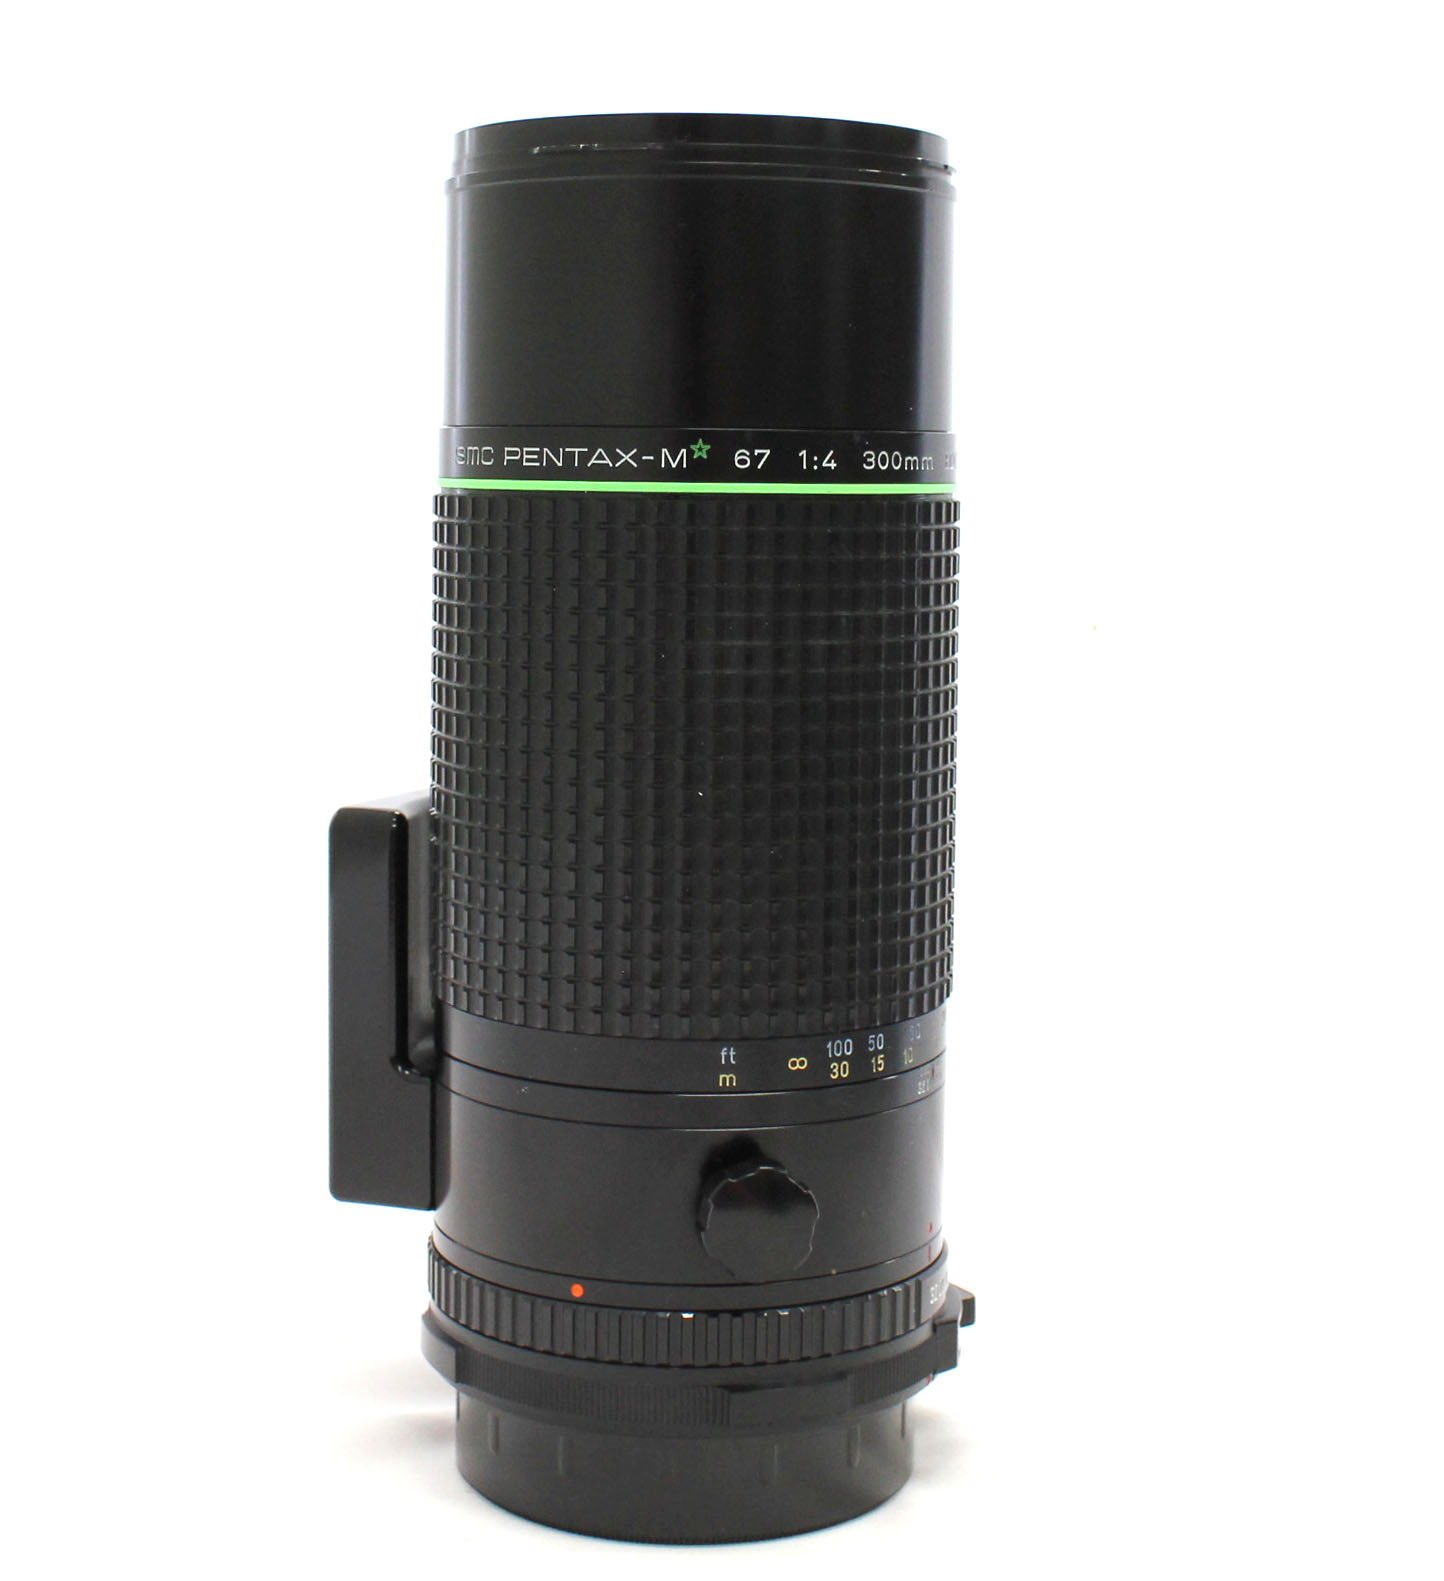 SMC Pentax-M* 67 300mm F/4 ED IF Green Star Lens for 6x7 67 II from Japan Photo 3